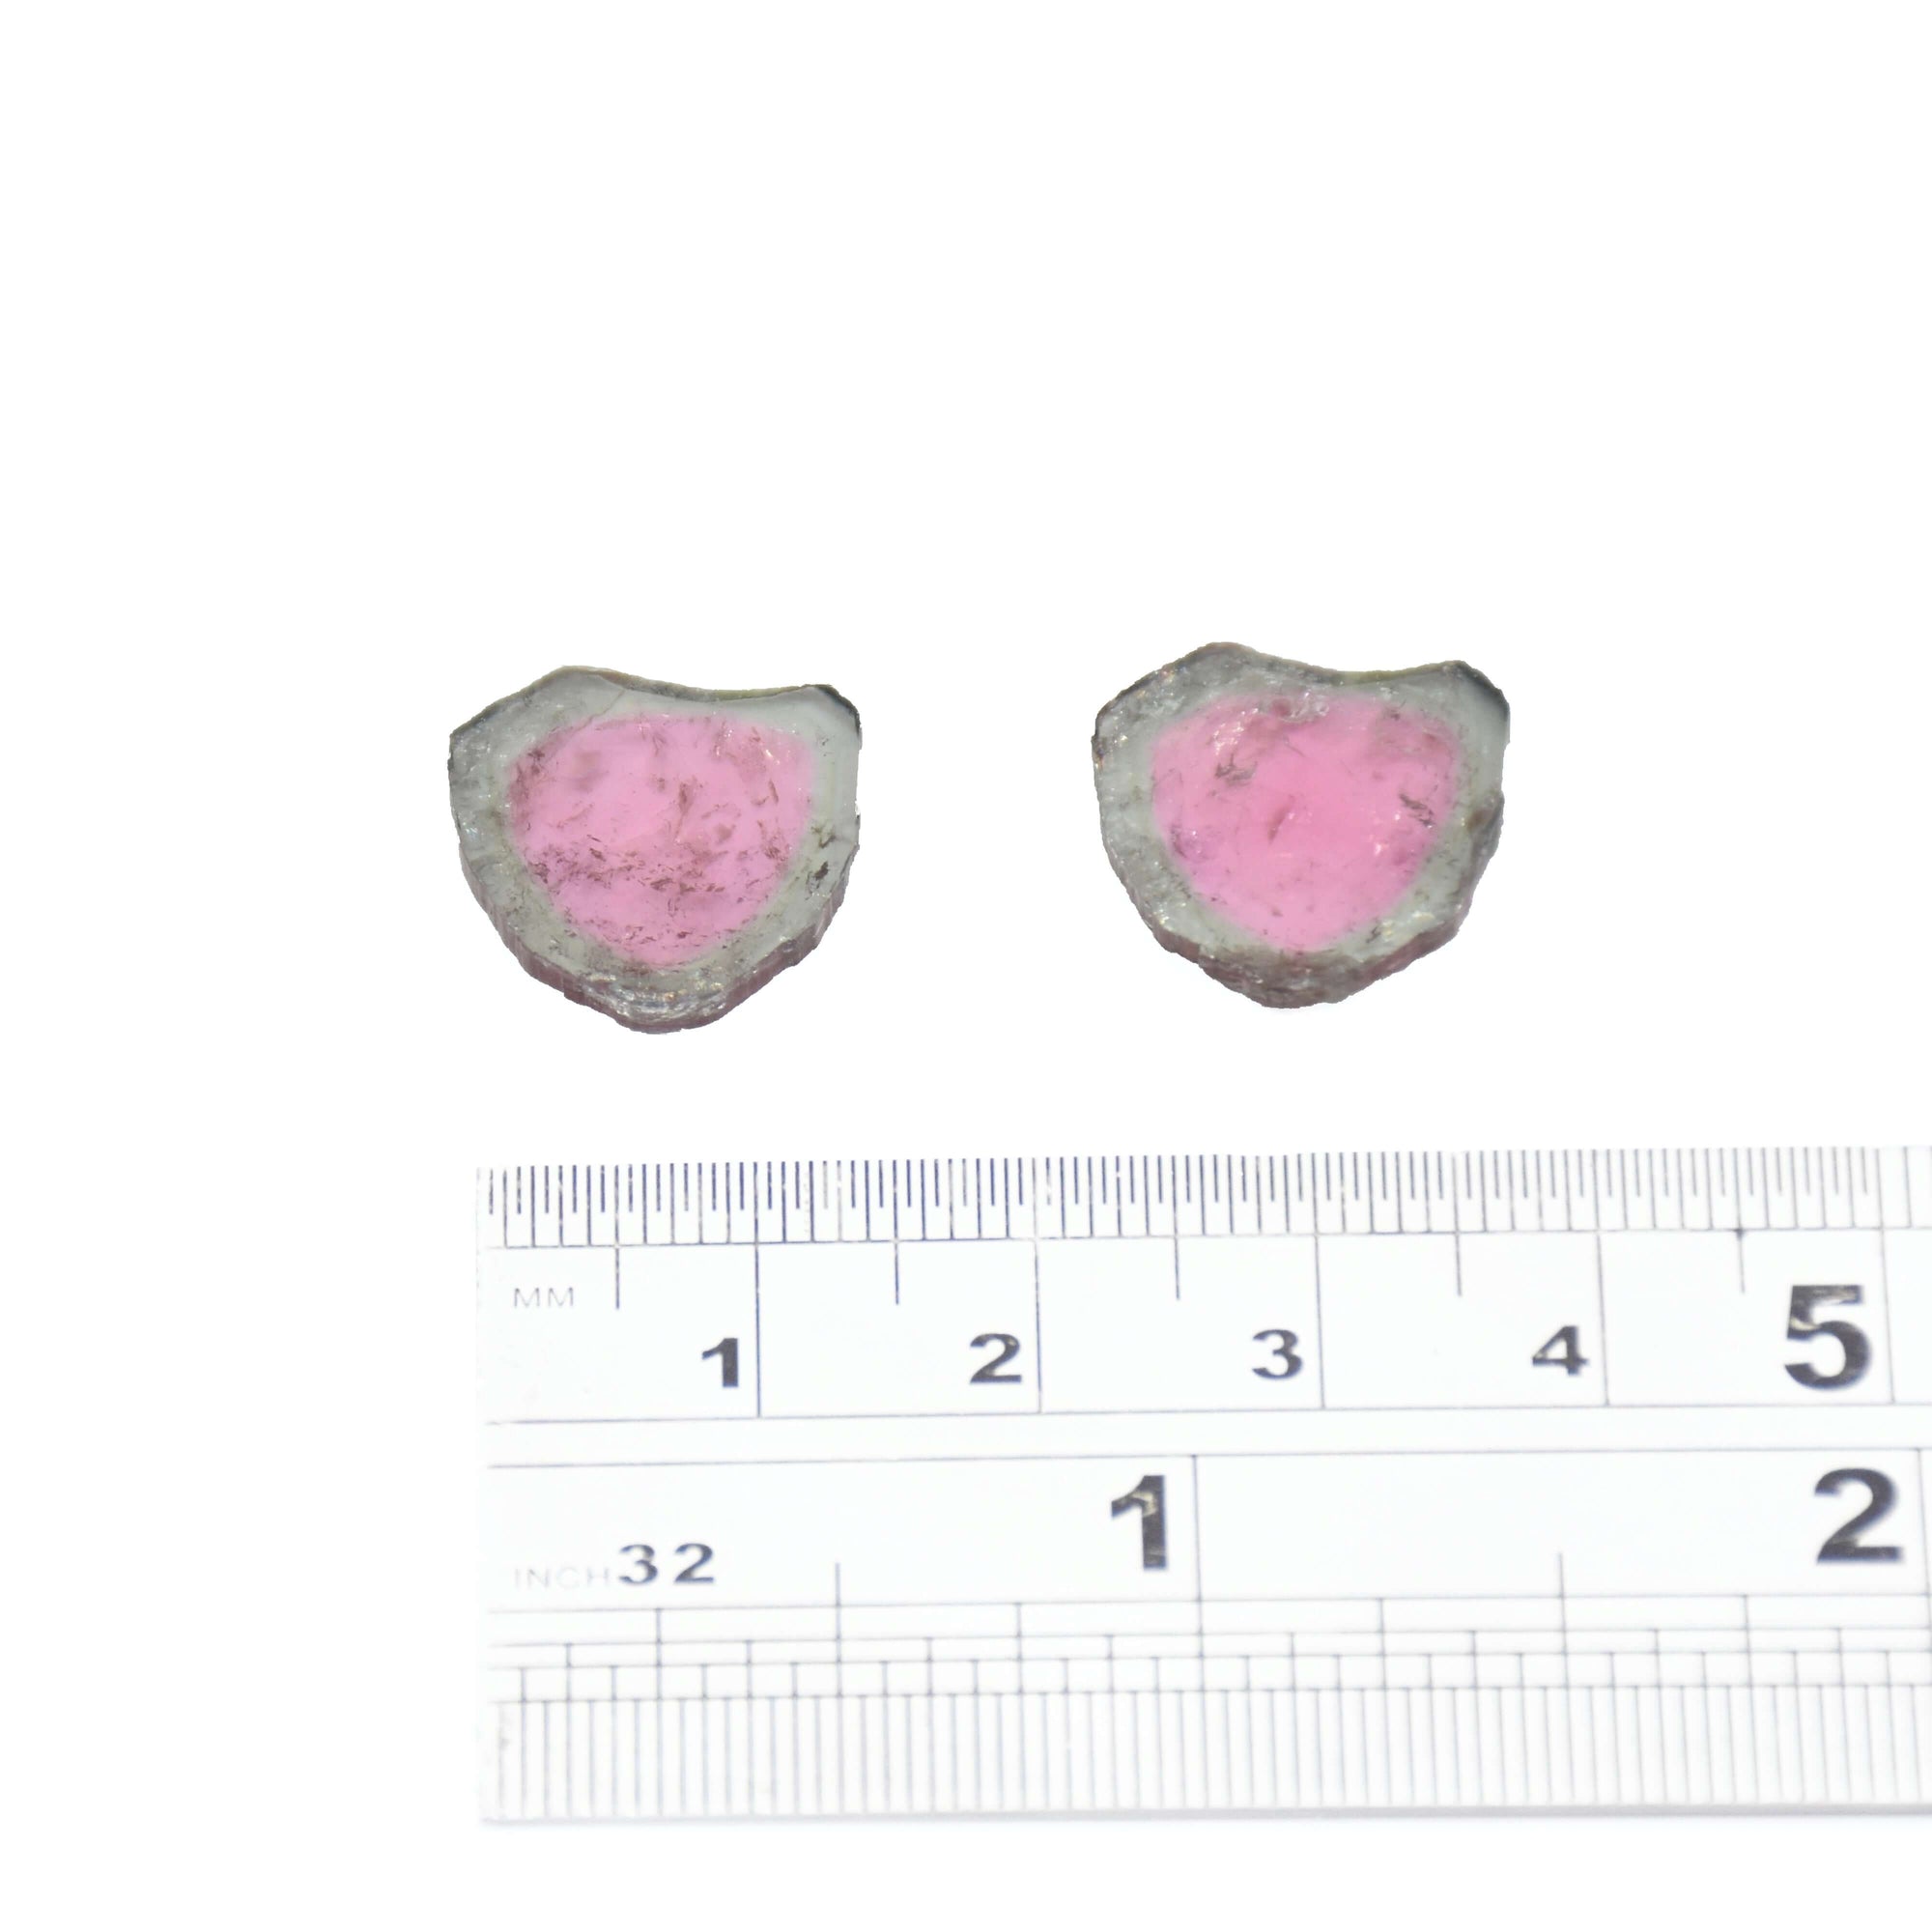 A pair of light teal and light pink loose watermelon tourmaline slices